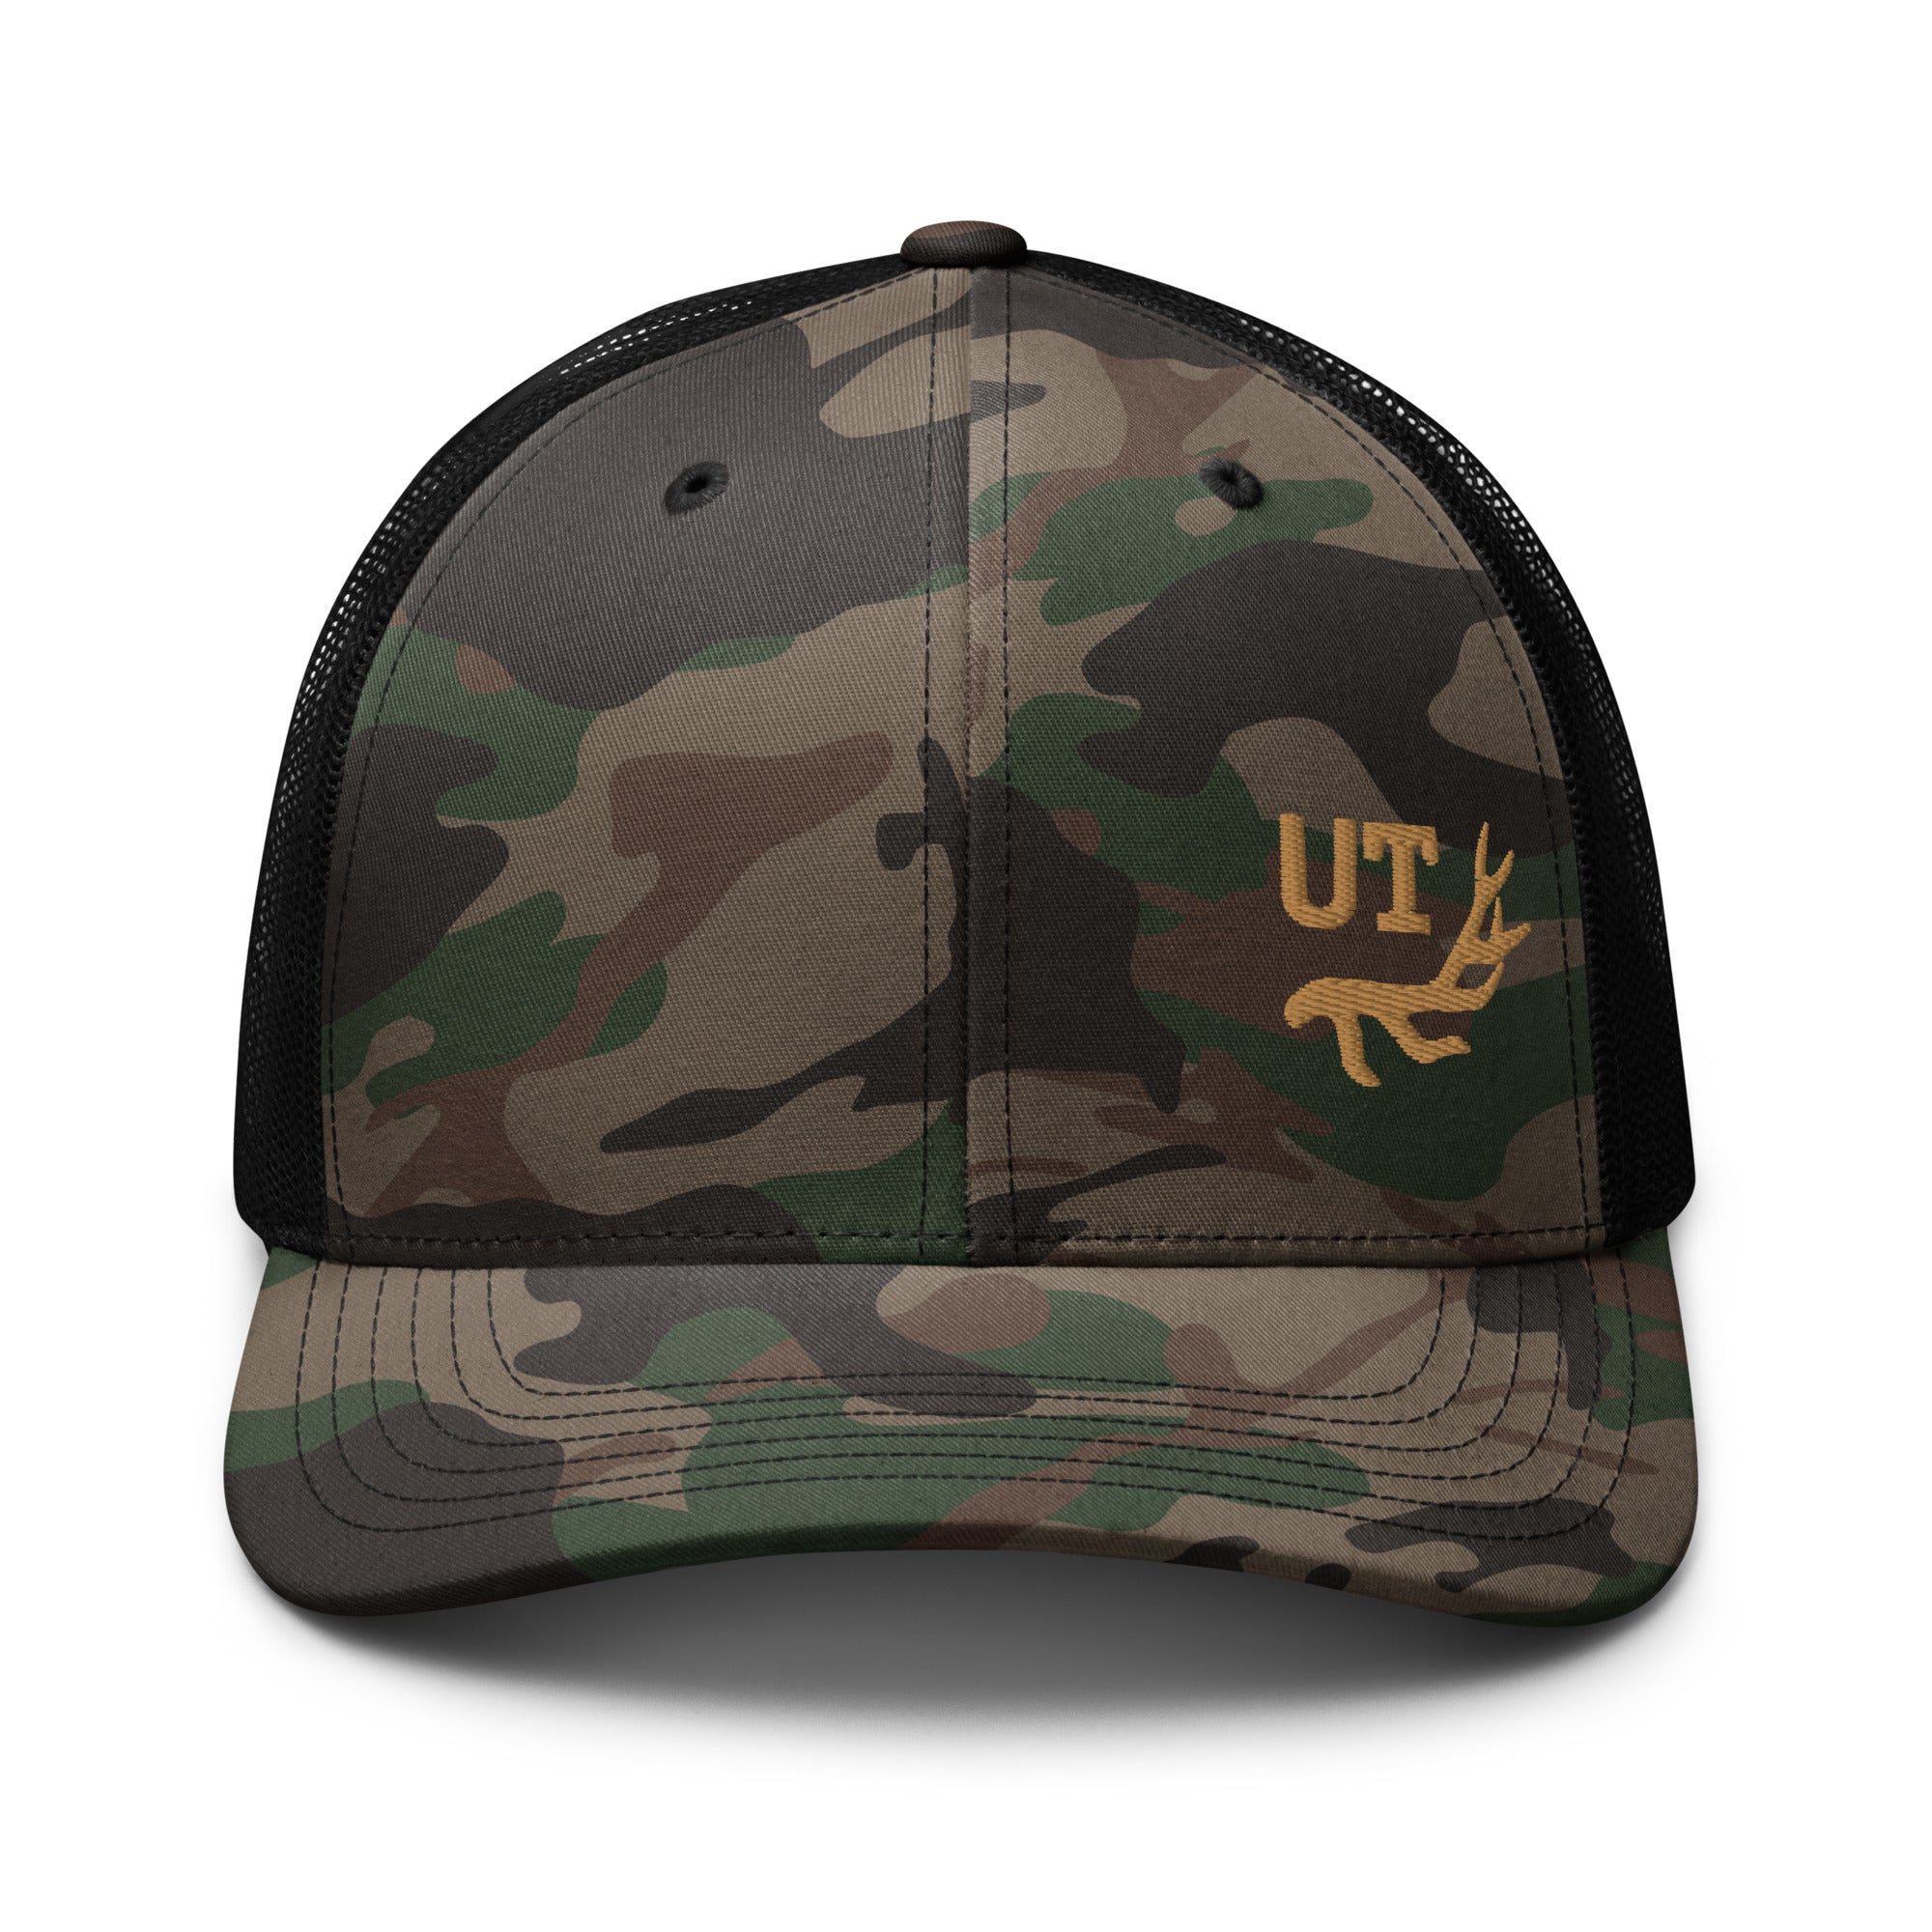 camouflage-trucker-hat-camo-black-front-655e67ab4272a.jpg